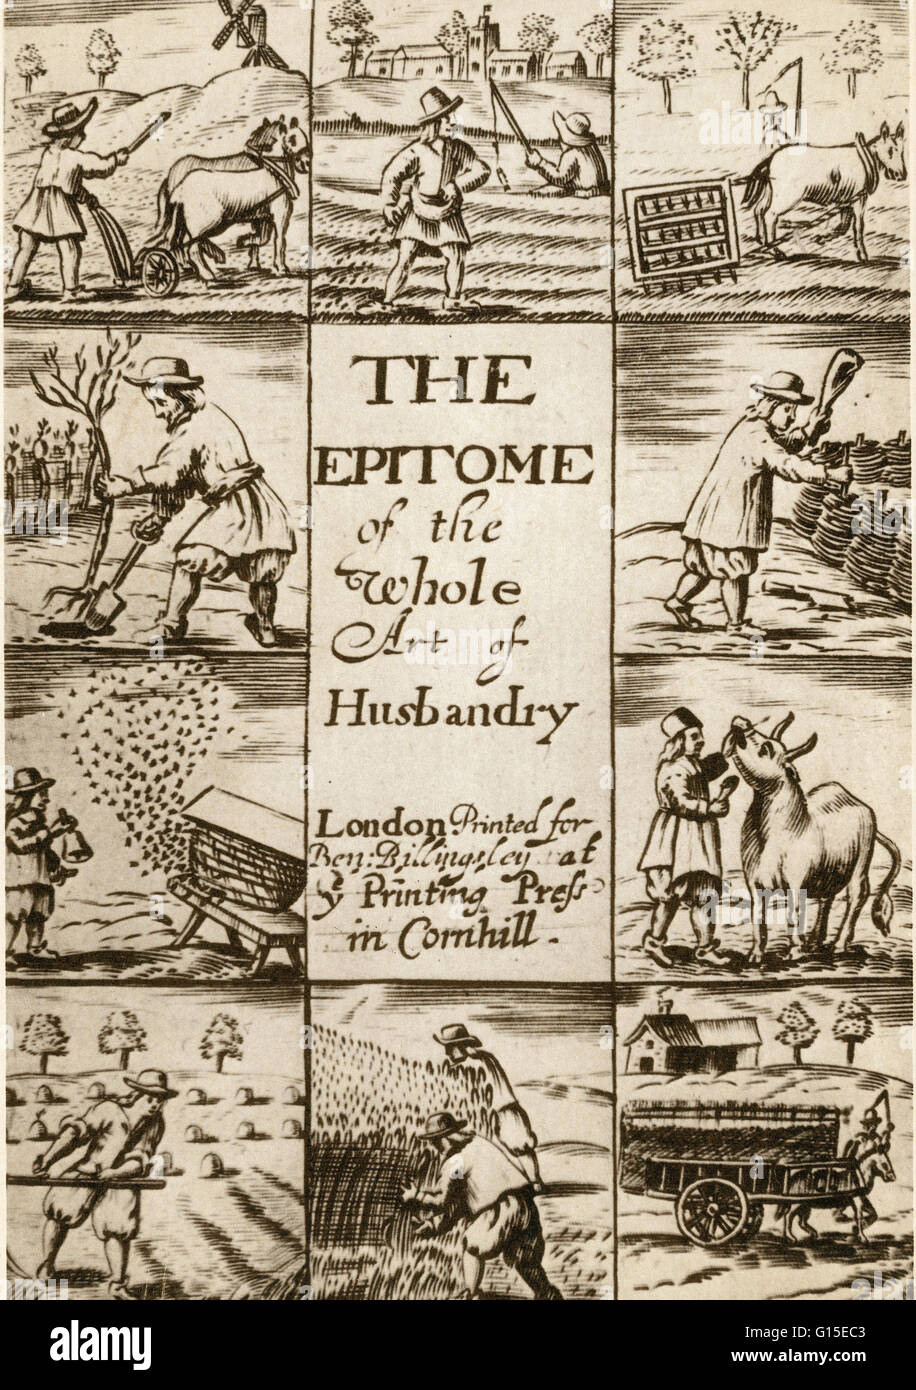 Title page from 'The Epitome of the whole art of husbandry' by Joseph Blograve, 1675. Animal husbandry is the agricultural practice of breeding and raising livestock. Stock Photo